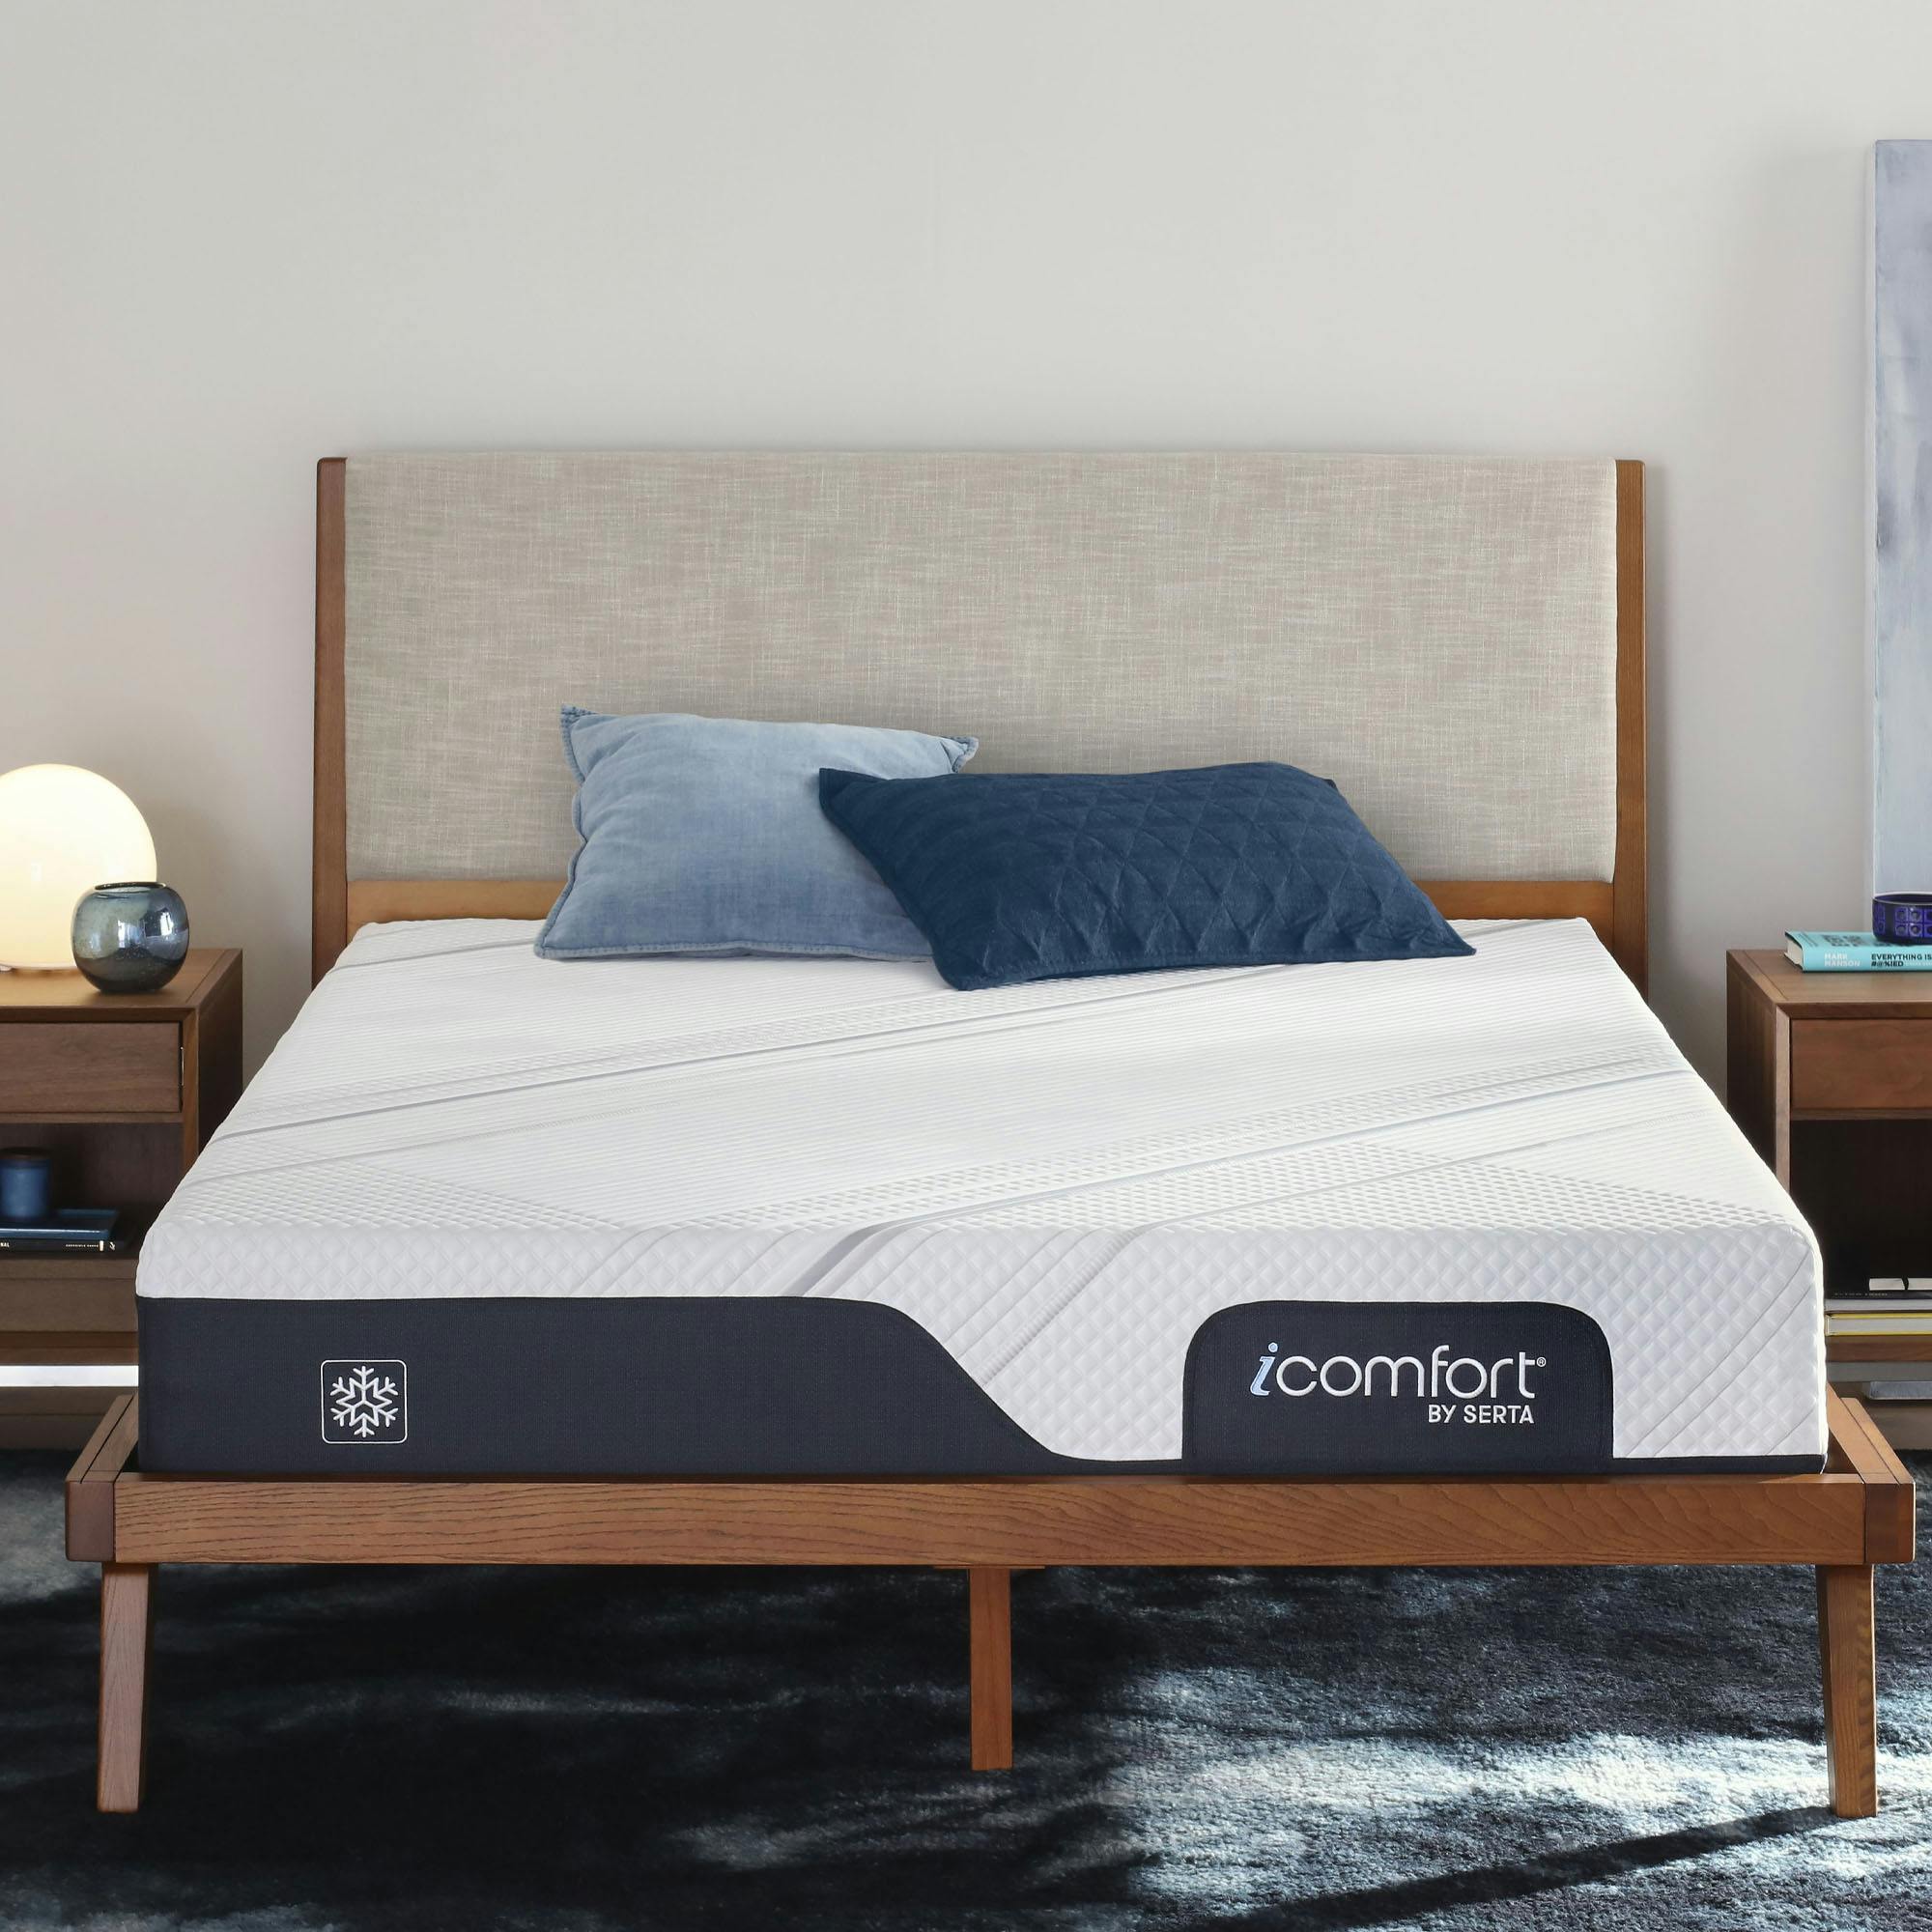 Cooling Mattress Icomfort Gel, Bed With Frame And Mattress